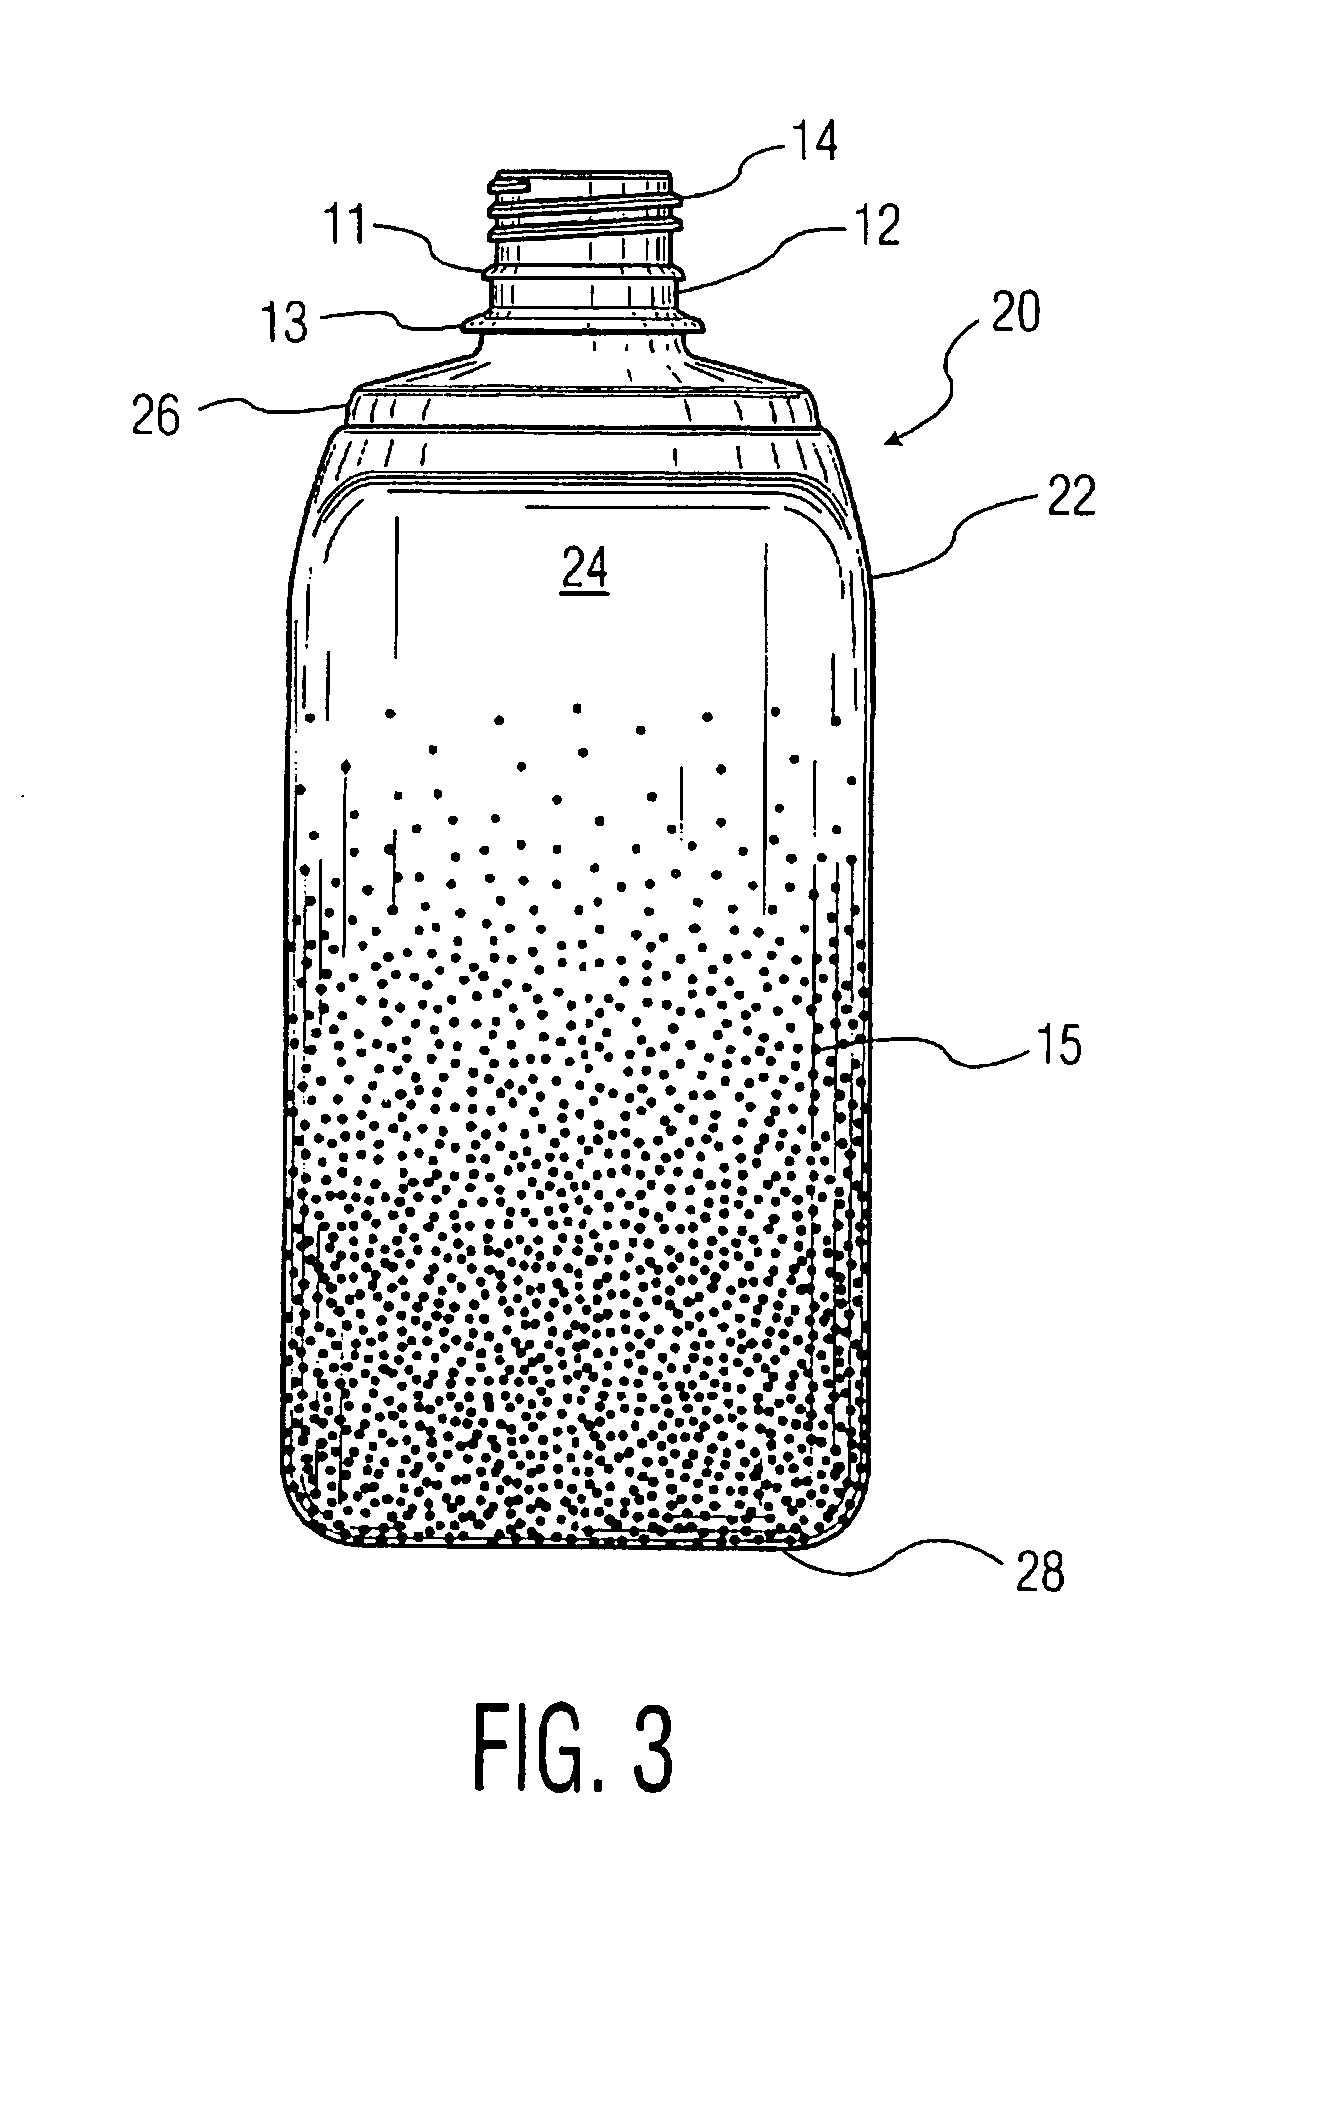 Blow Molded Polyester Container With An Over-Molded Thermoplastic Layer